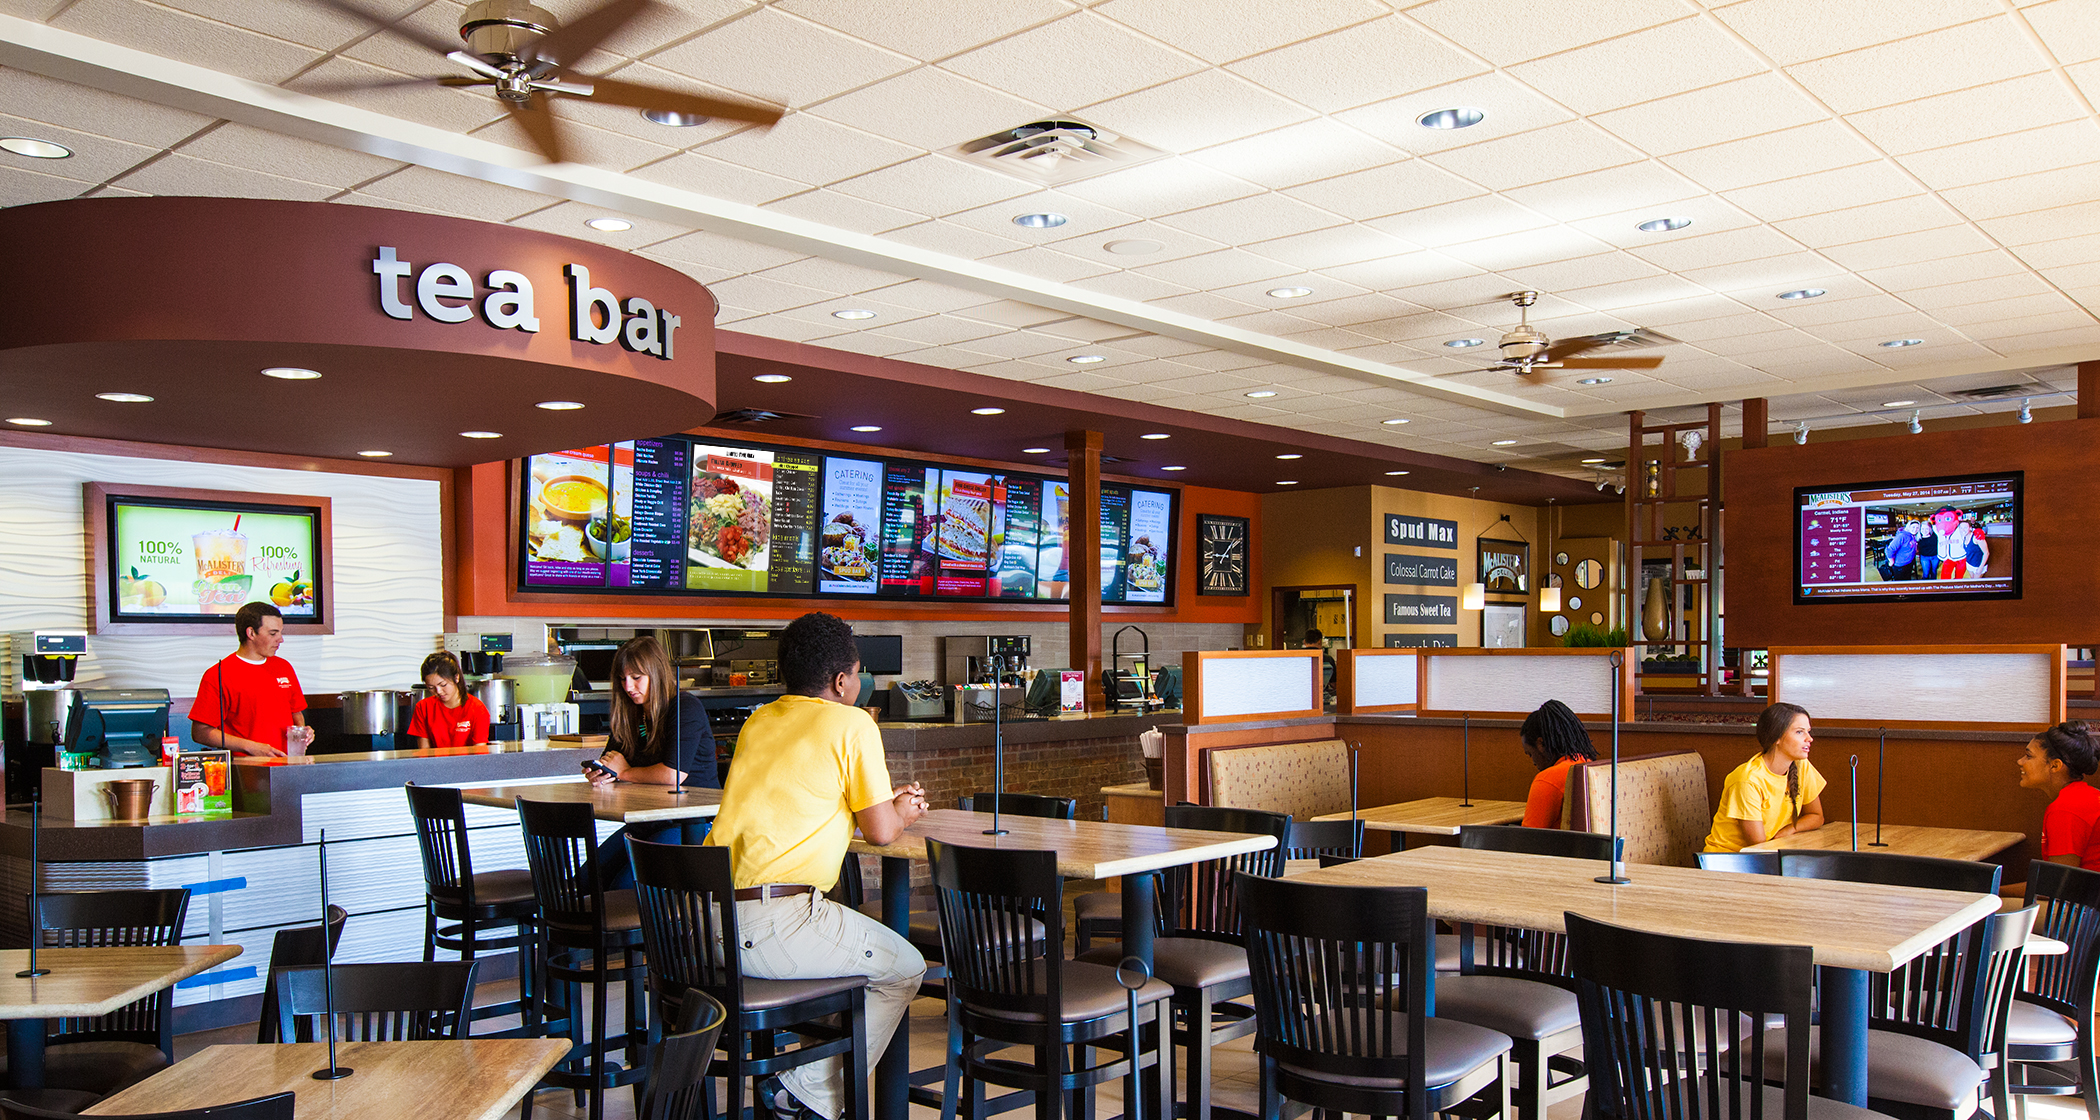 The Fishers McAlister’s Deli has reopened after being closed for remodeling. (Submitted photo.)